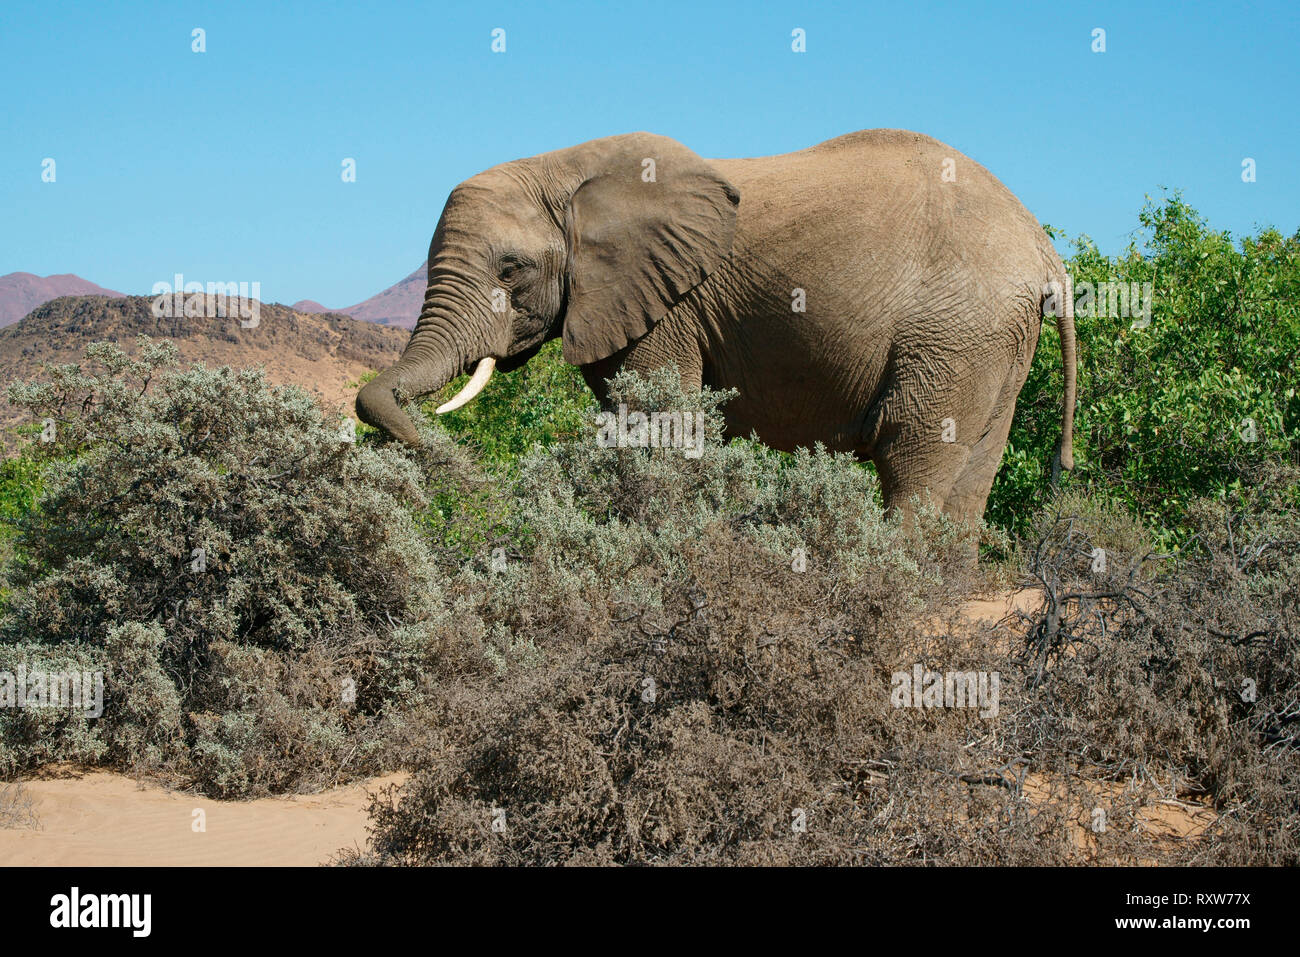 Desert-adapted elephant (Loxodonta Africana) is an African Bush Elephant with special adaptations to survive in the deserts of Africa. They have longer legs,smaller stature and a larger footprint than other Bush Elephants. Near Mowani Lodge in the Namib desert of northwest Namibia, Africa Stock Photo